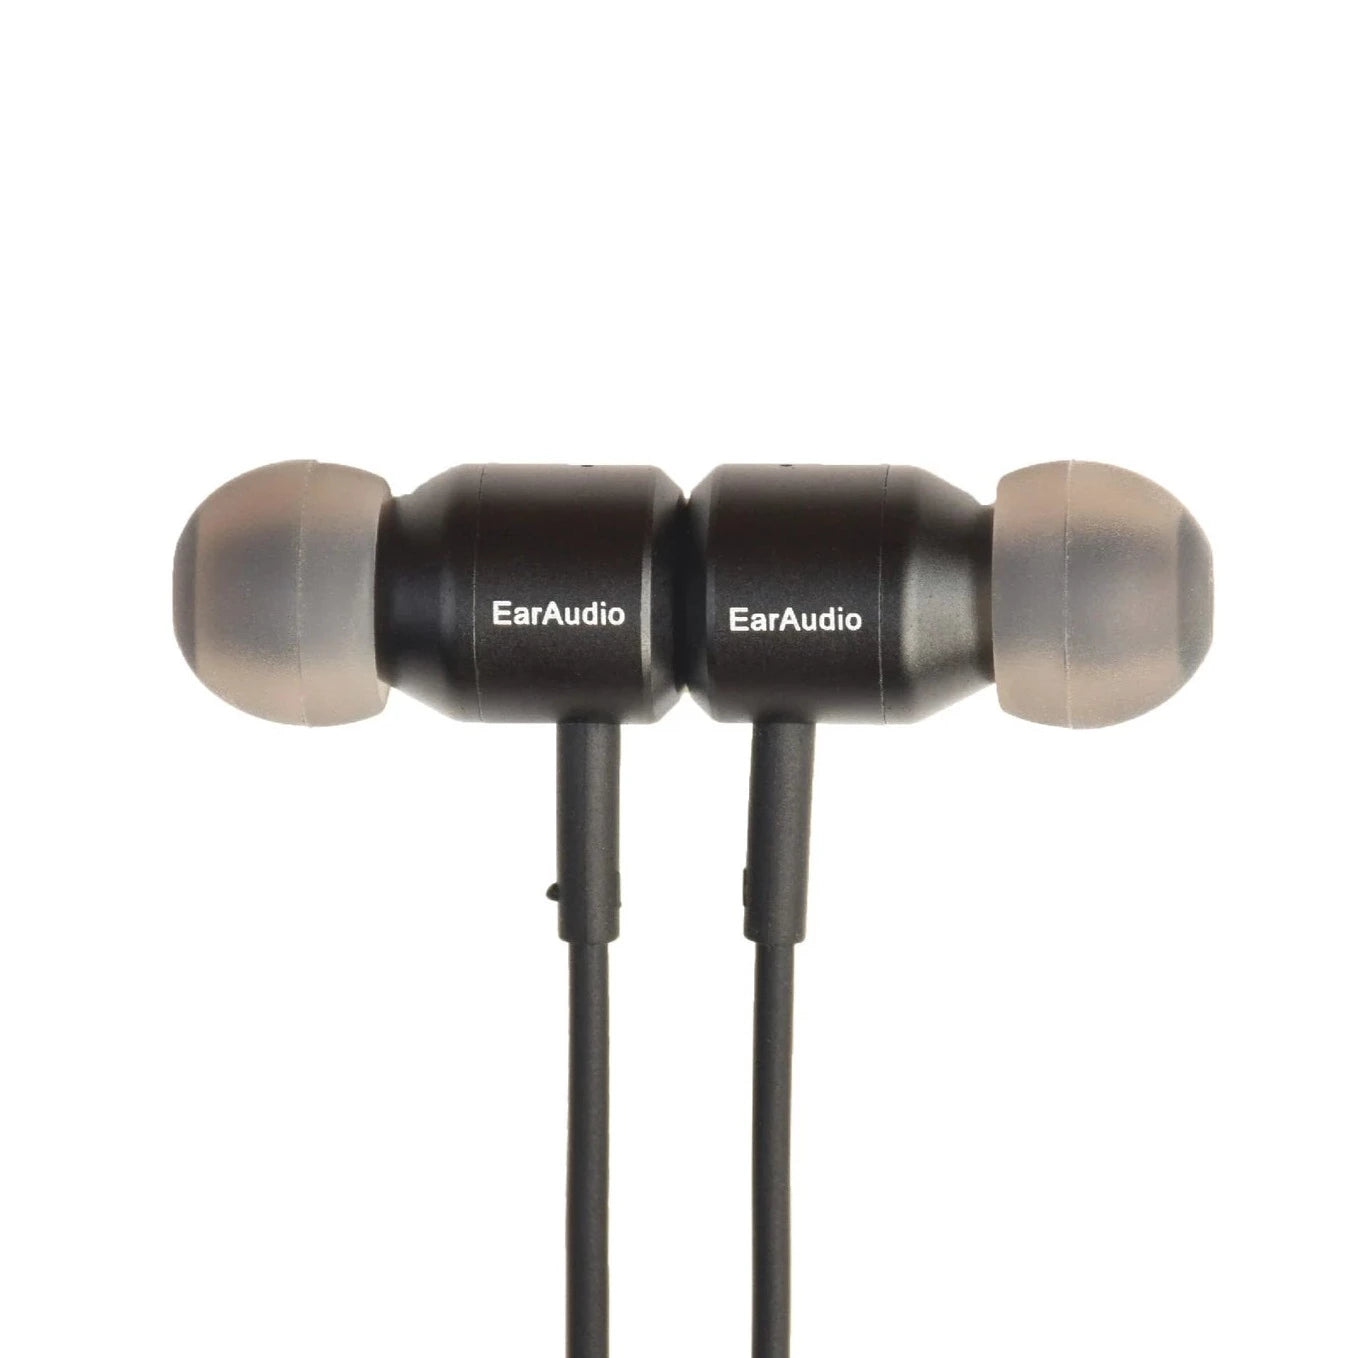 EarAudio Primus Wired Earphone With Mic